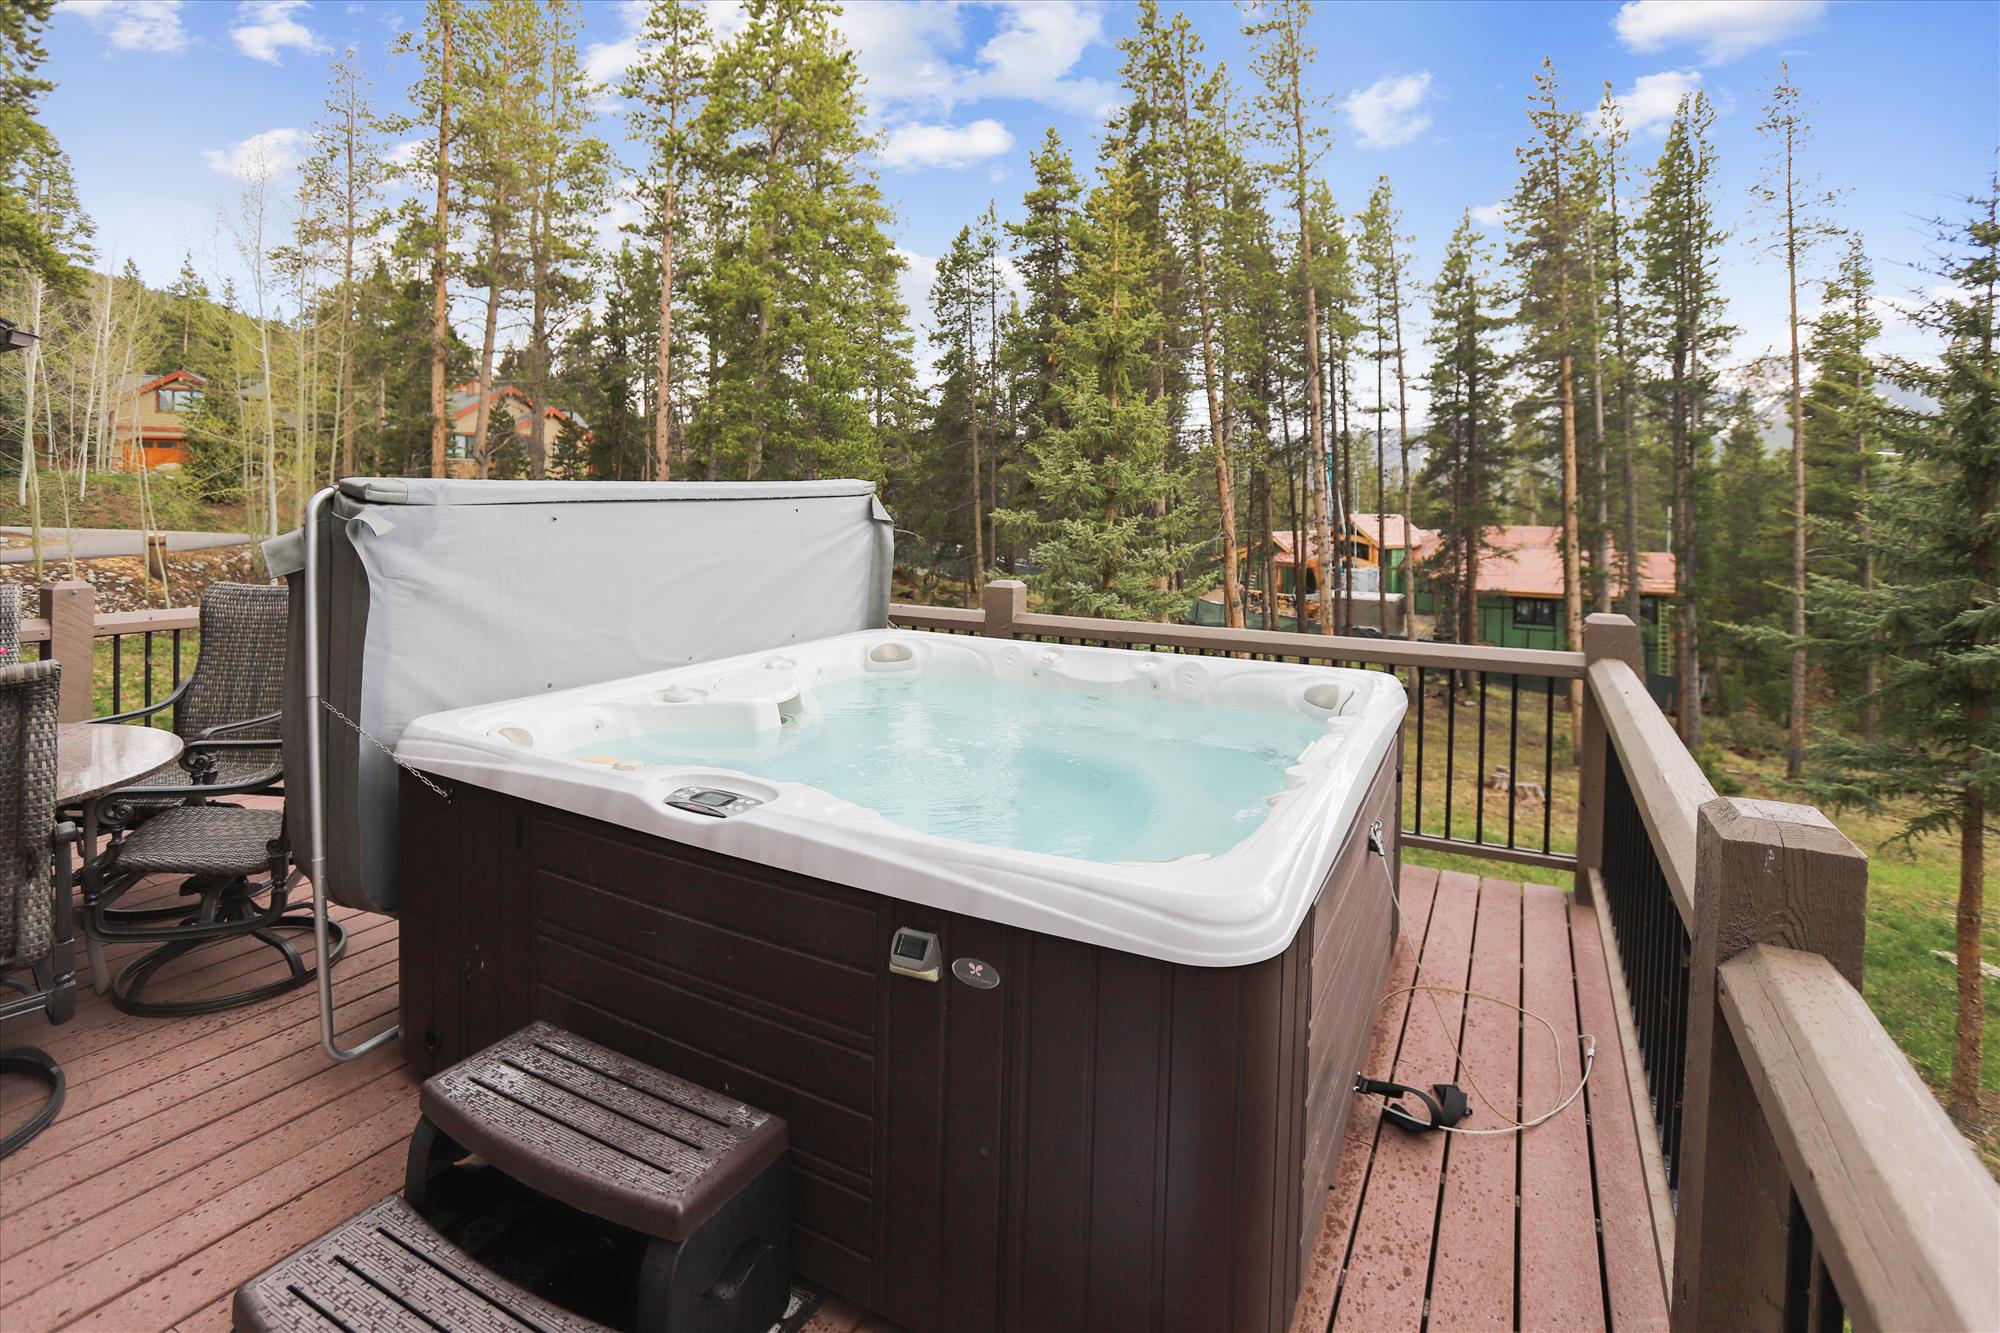 Warm up in this spacious hot-tub after a long day on the slopes - Evergreen Lodge Breckenridge Vacation Rental